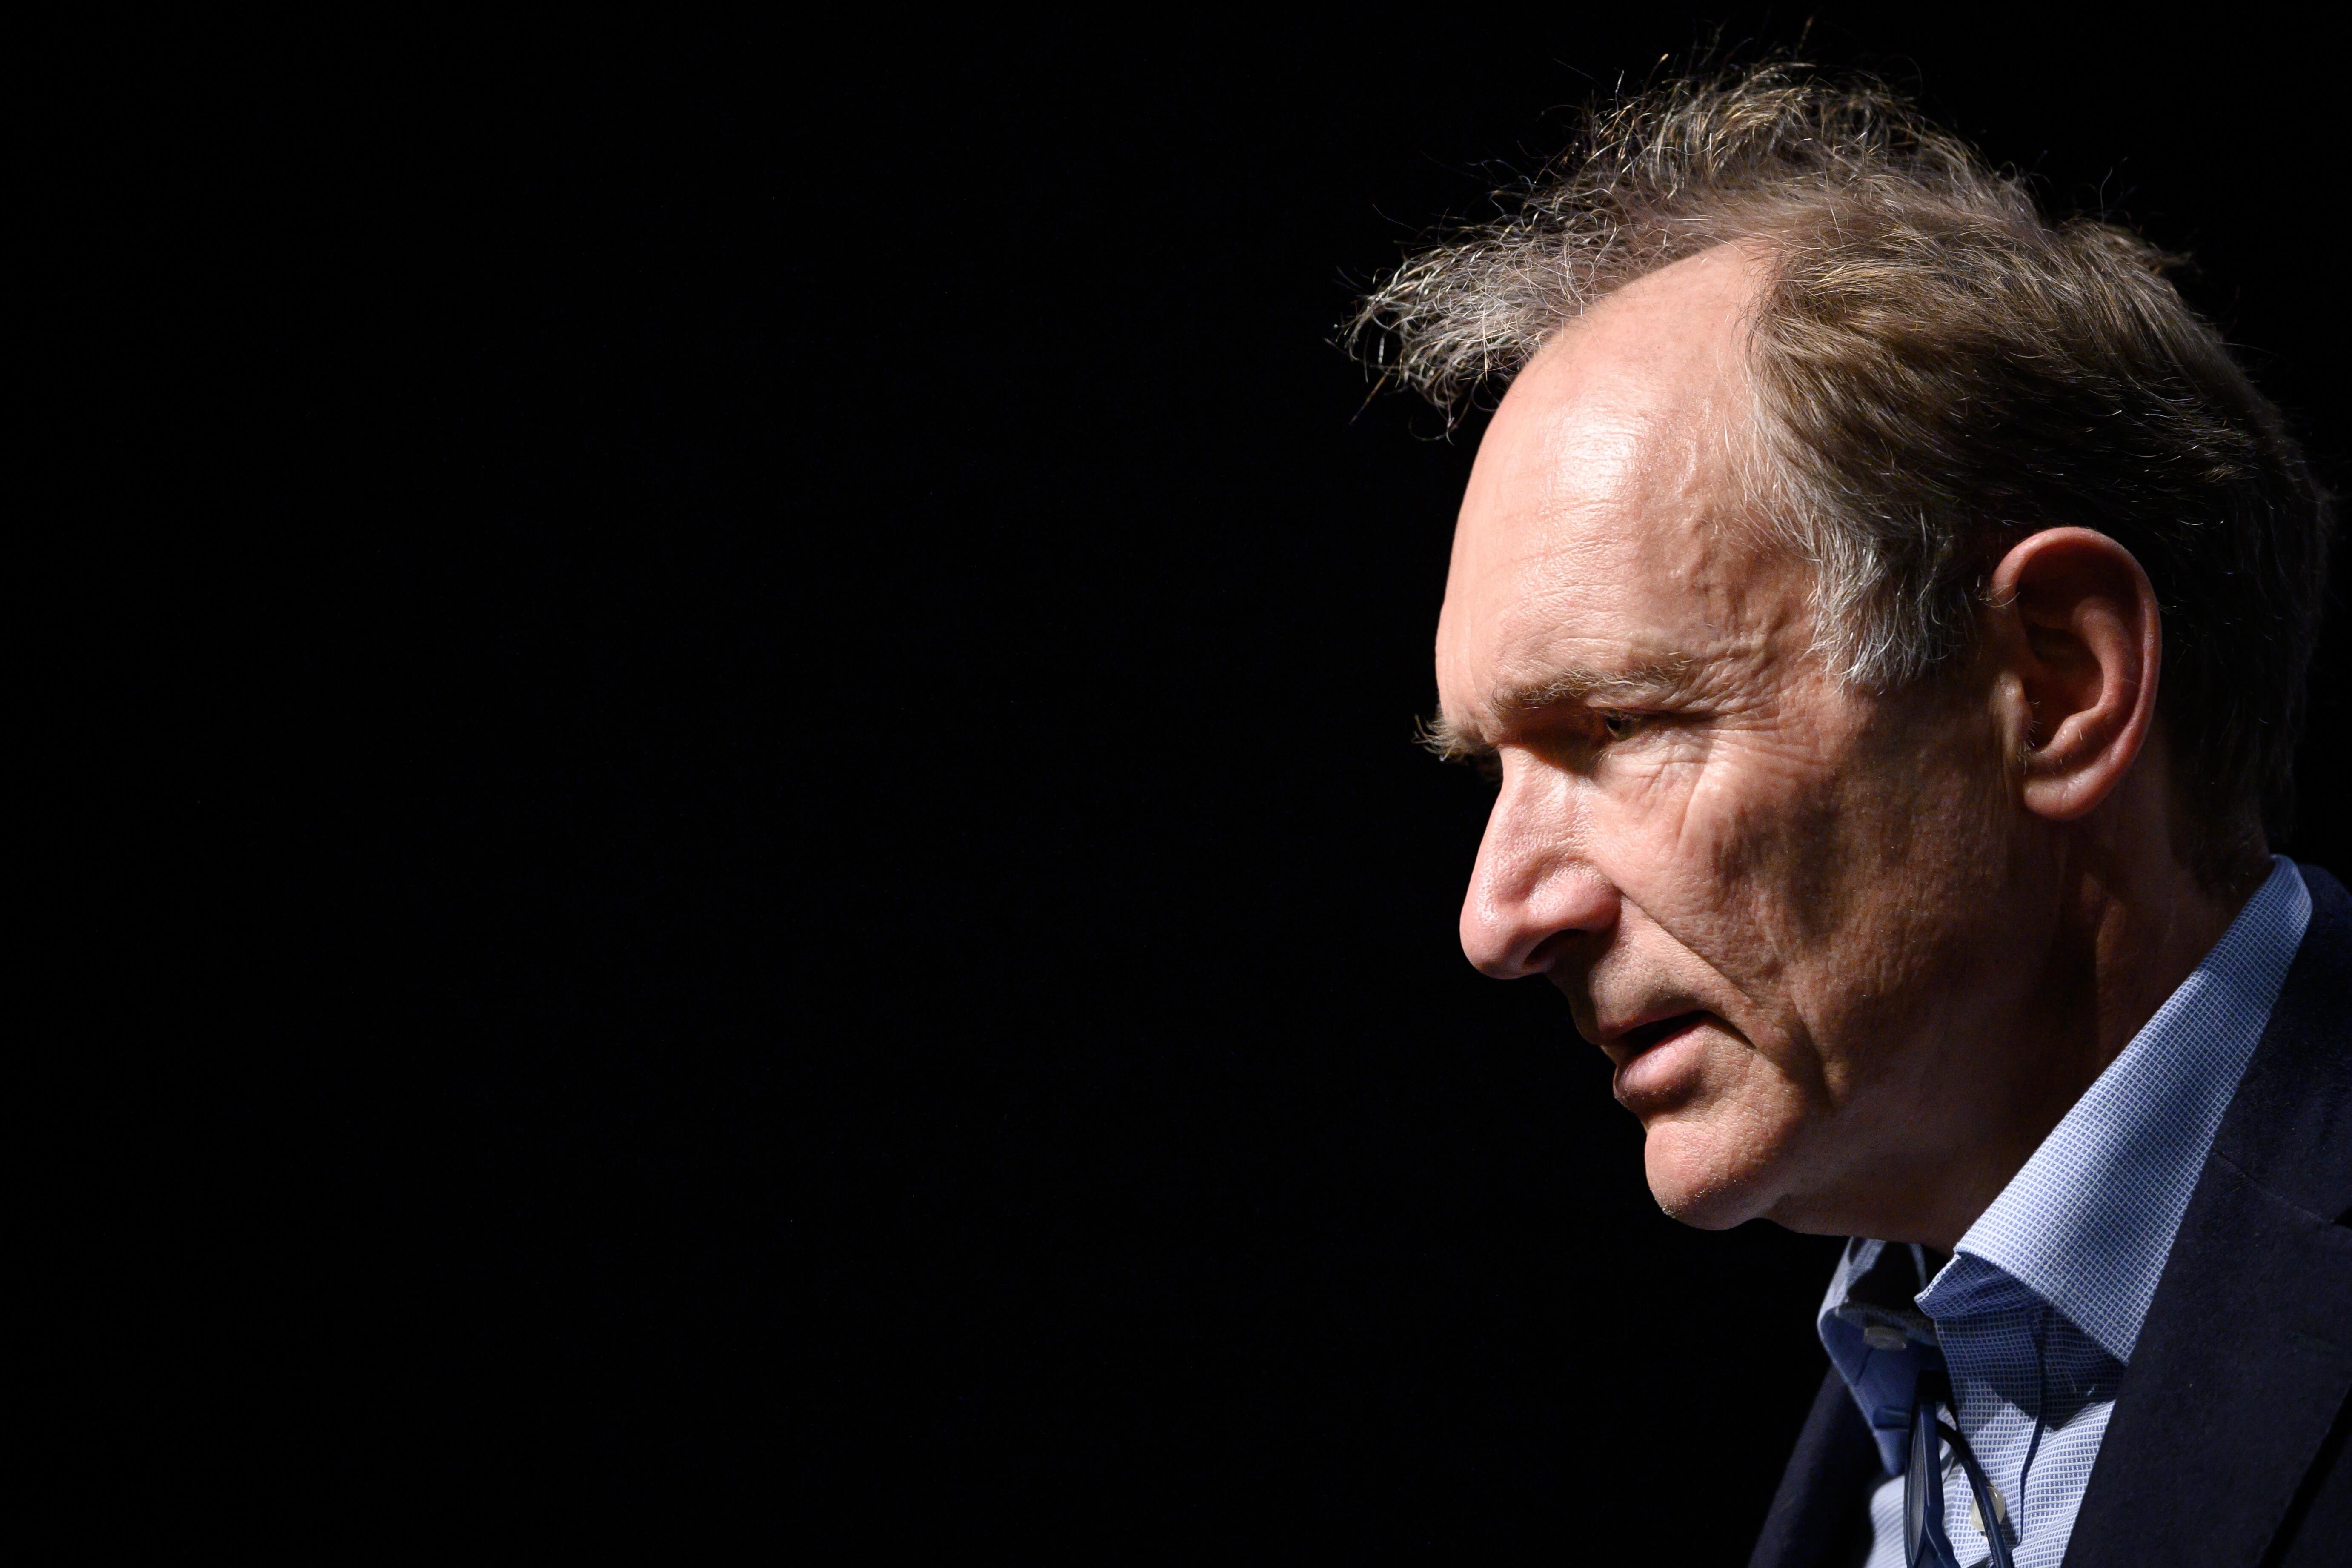 World Wide Web inventor Tim Berners-Lee takes part in a session entitled: "Thirty Years On: Let the Web Serve Humanity"